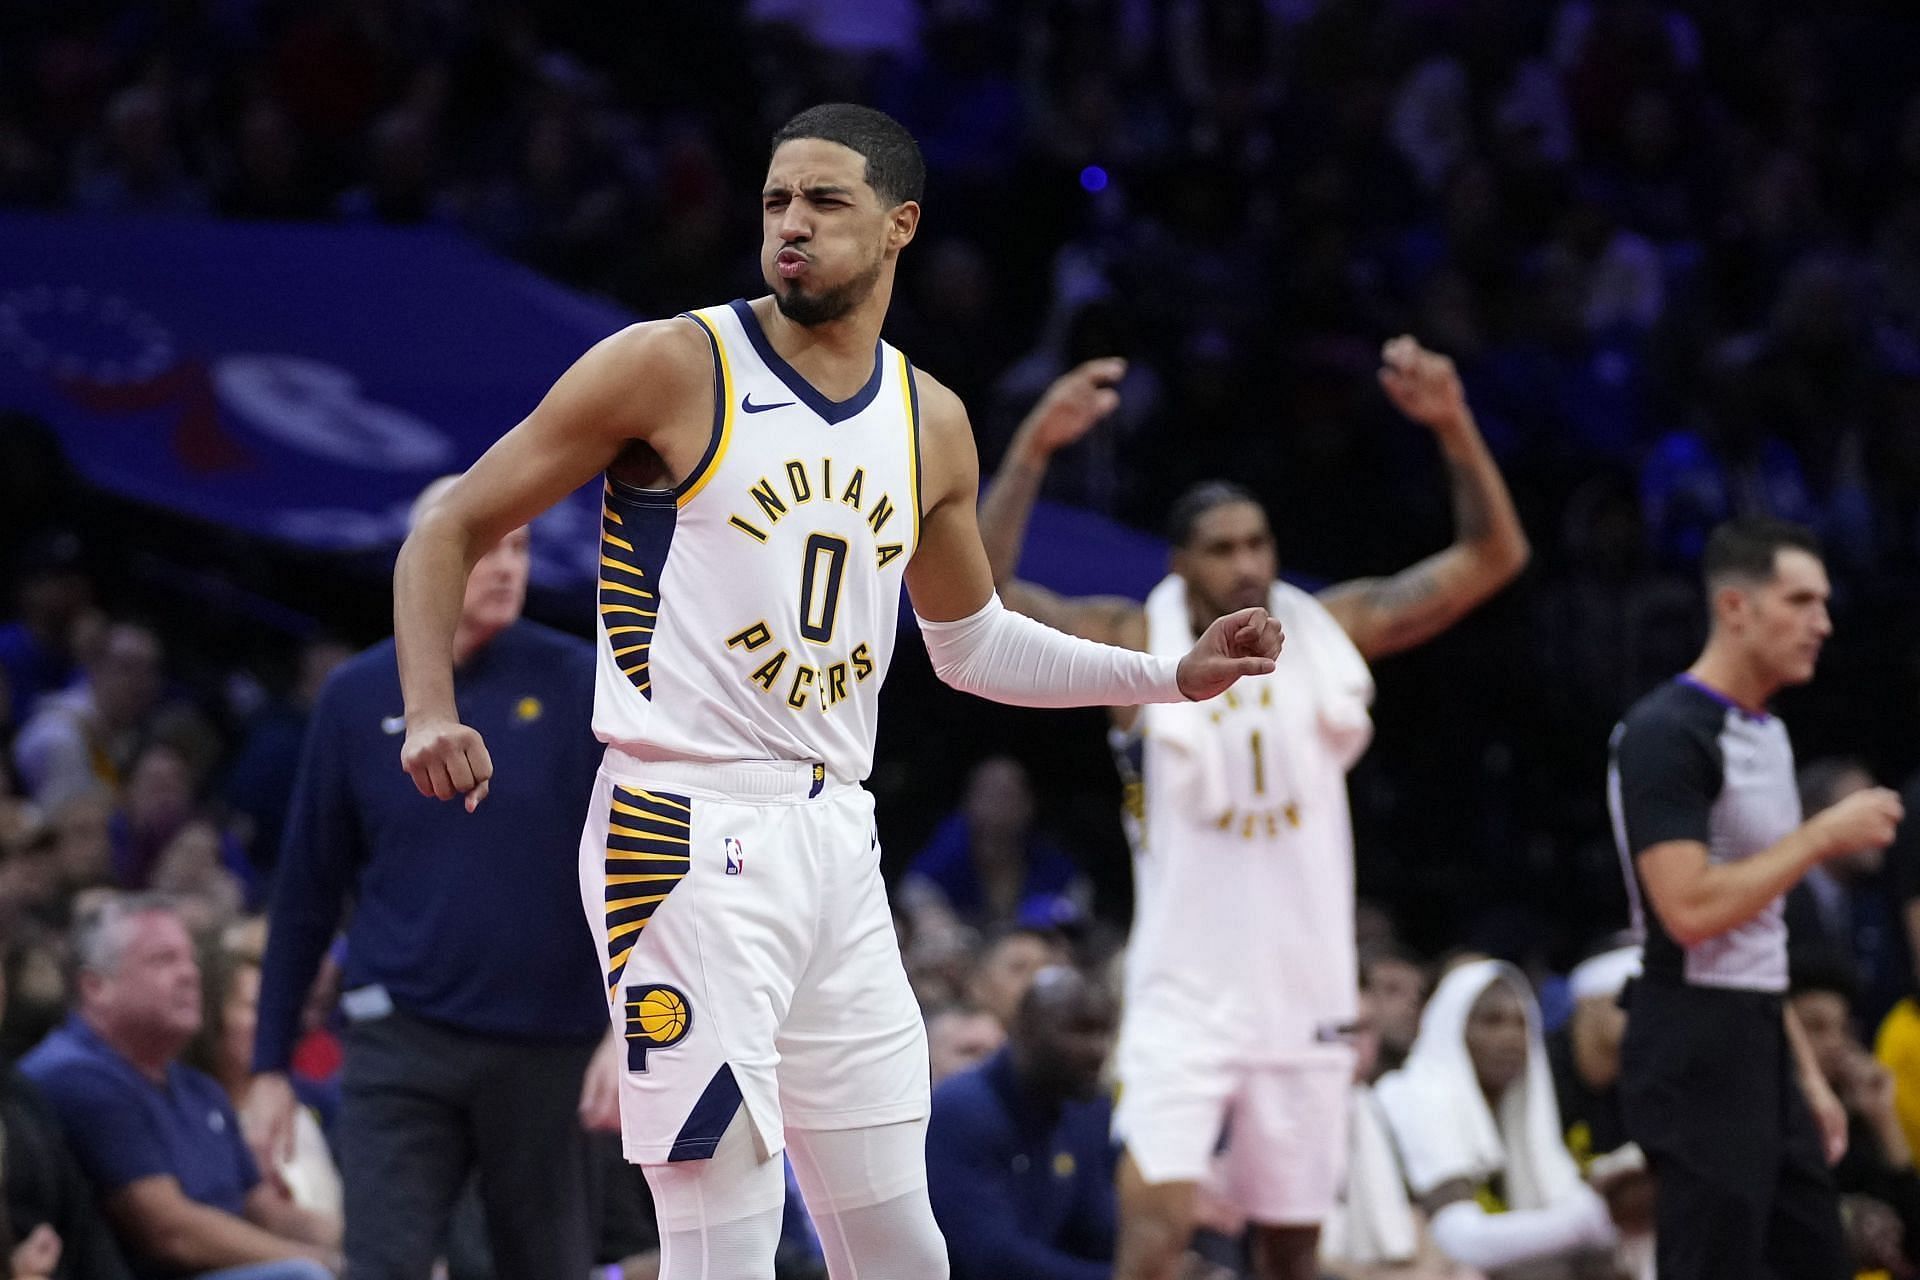 Looking at the reasons why the Indiana Pacers could win over the Boston Celtics